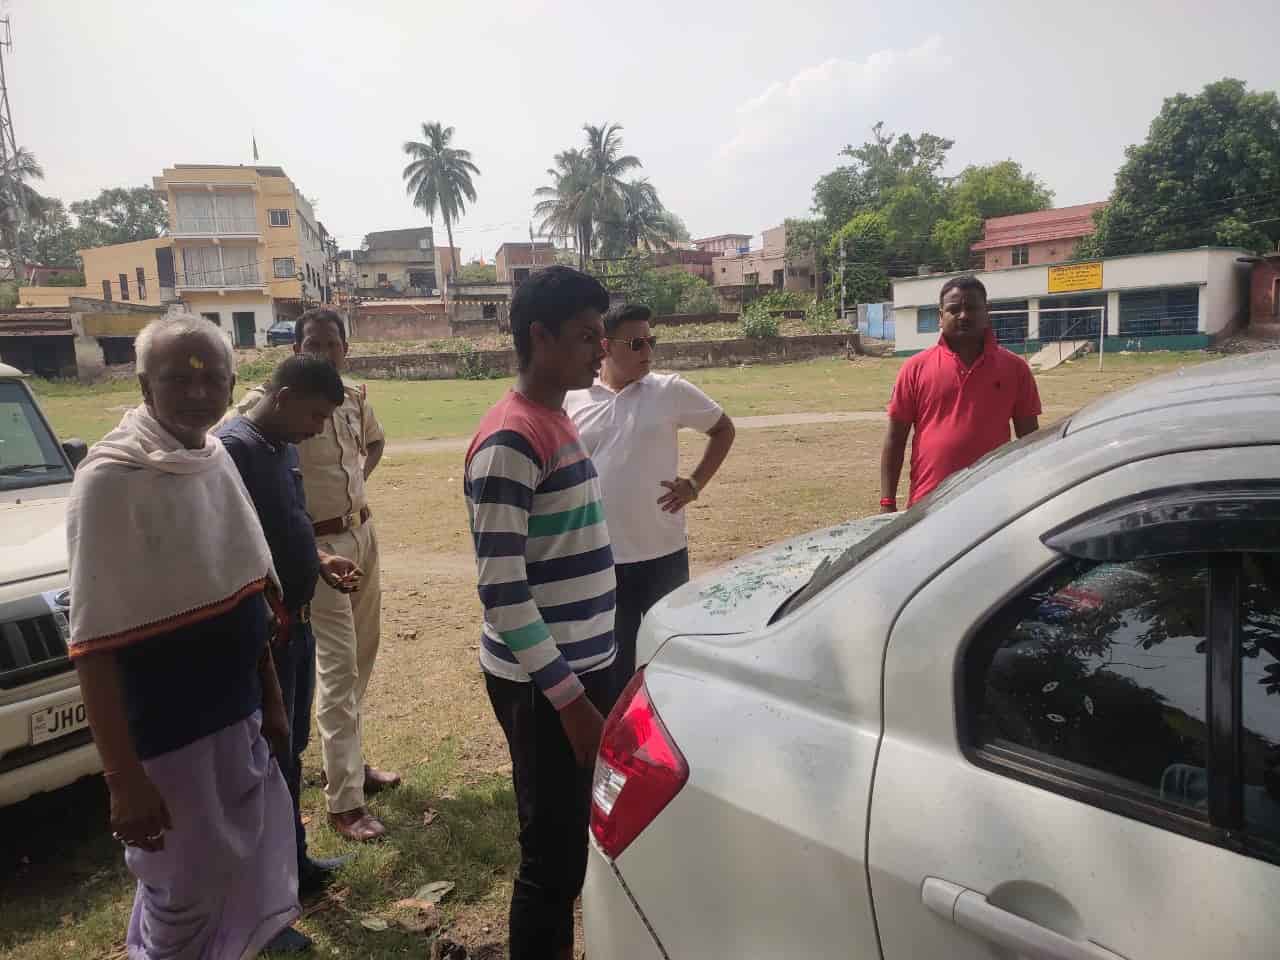 Drunk youths damage resident Kush Soni's car in Telco with stone pelting after a confrontation over group gathering. Investigation underway.
